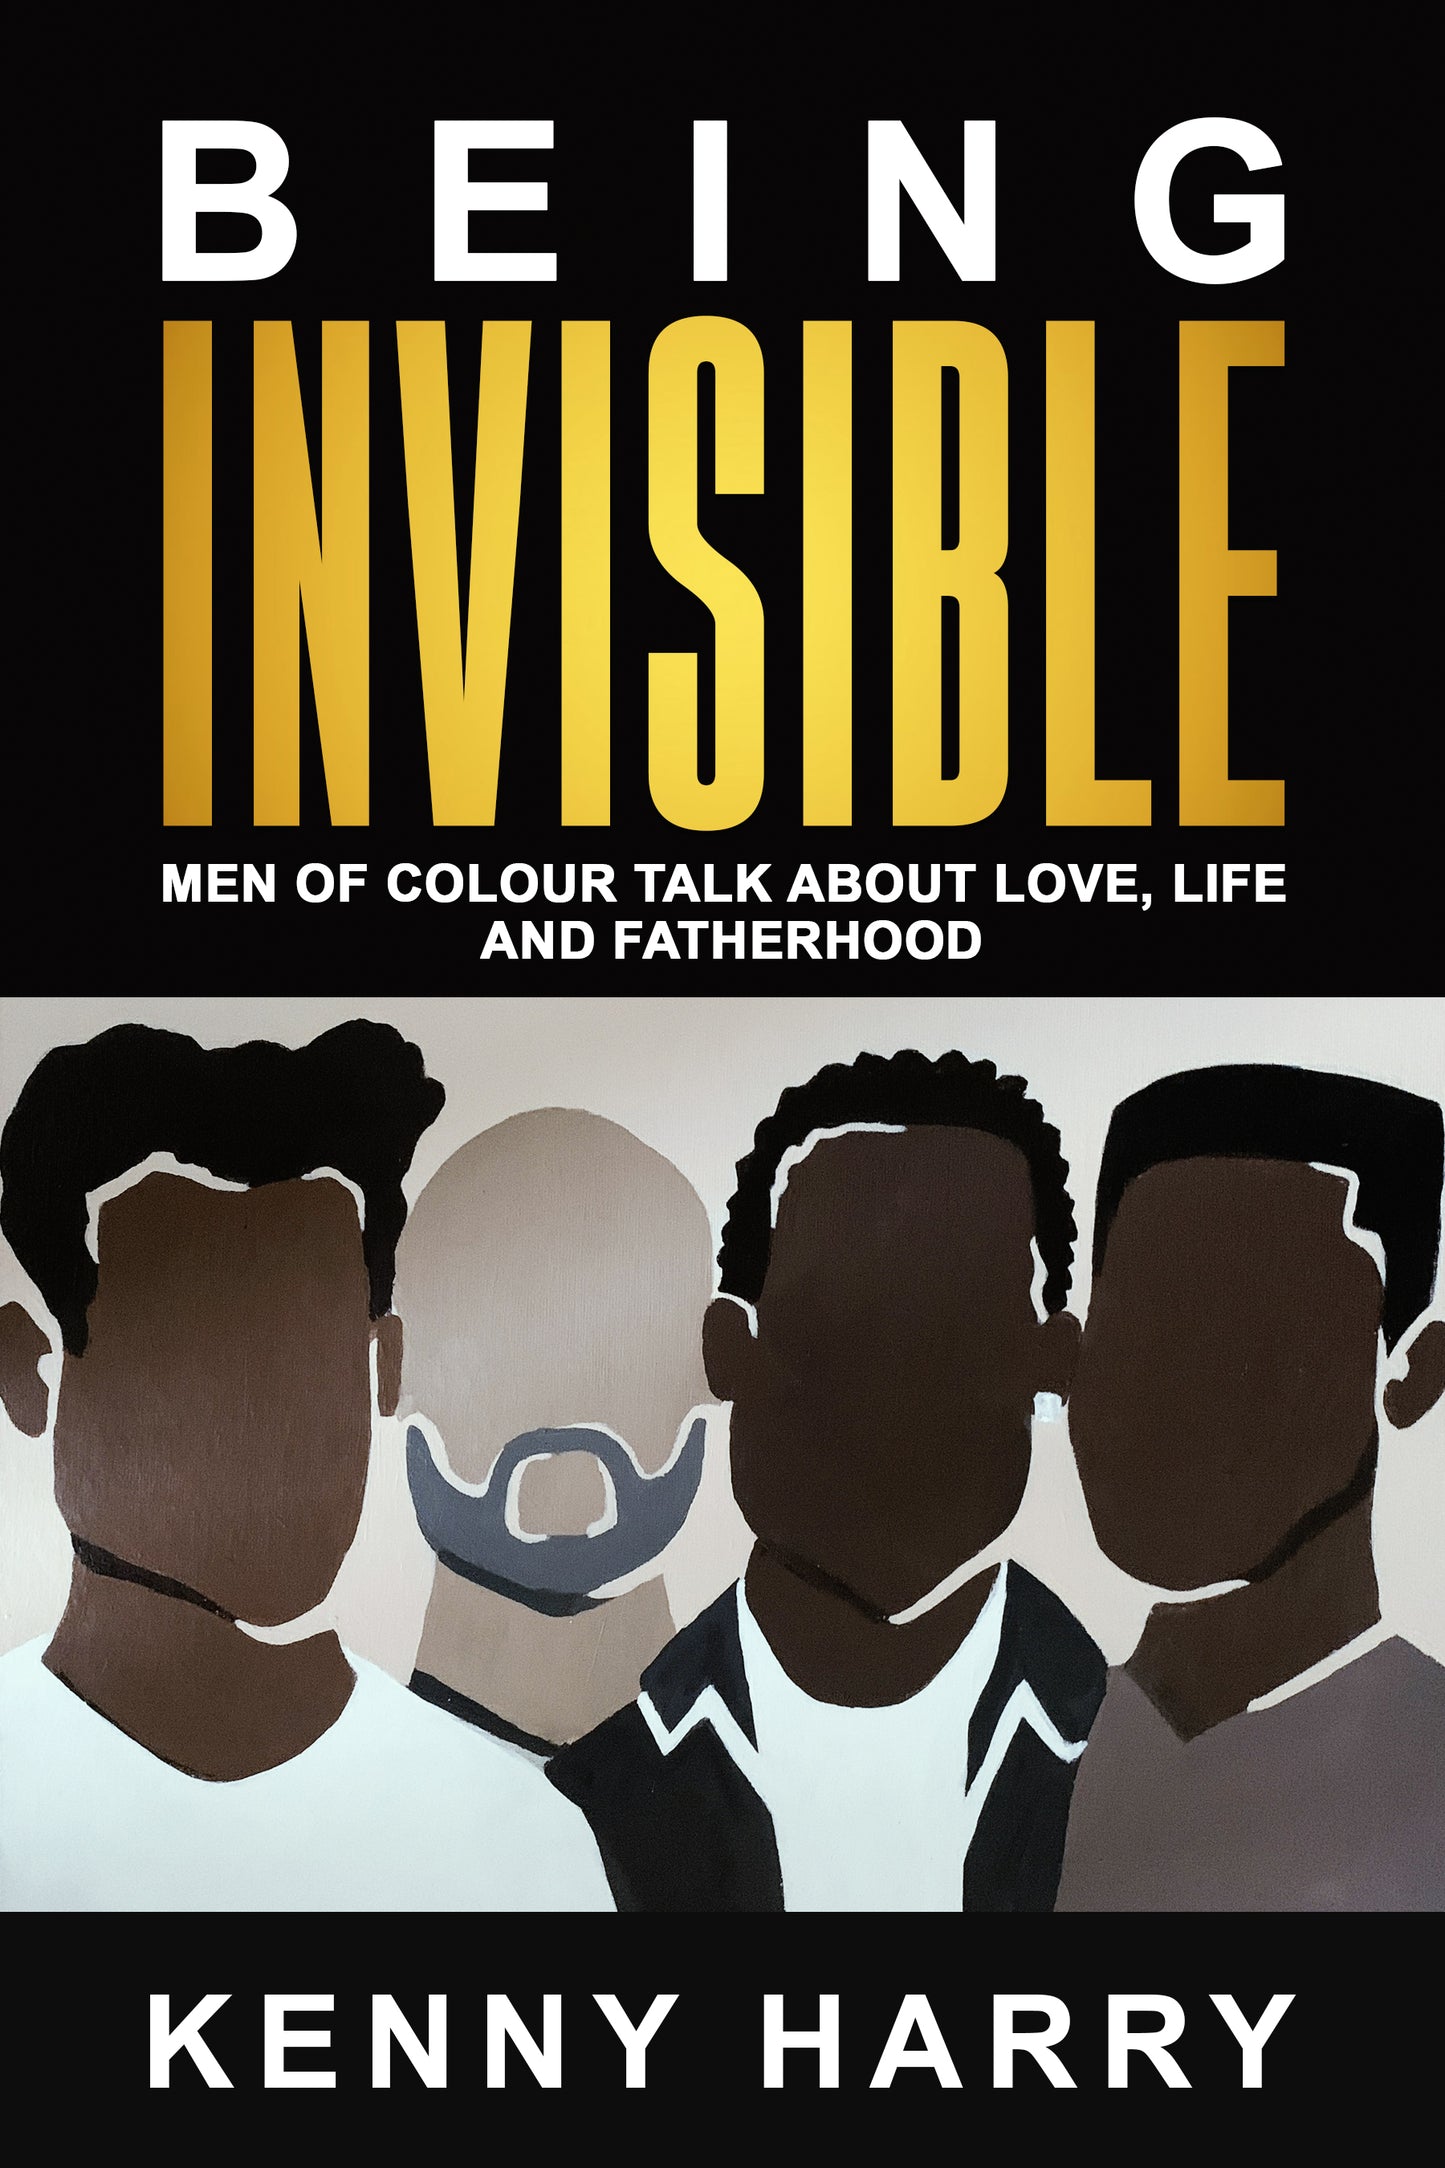 Being Invisible: Men of Colour Talk About Love, Life, and Fatherhood